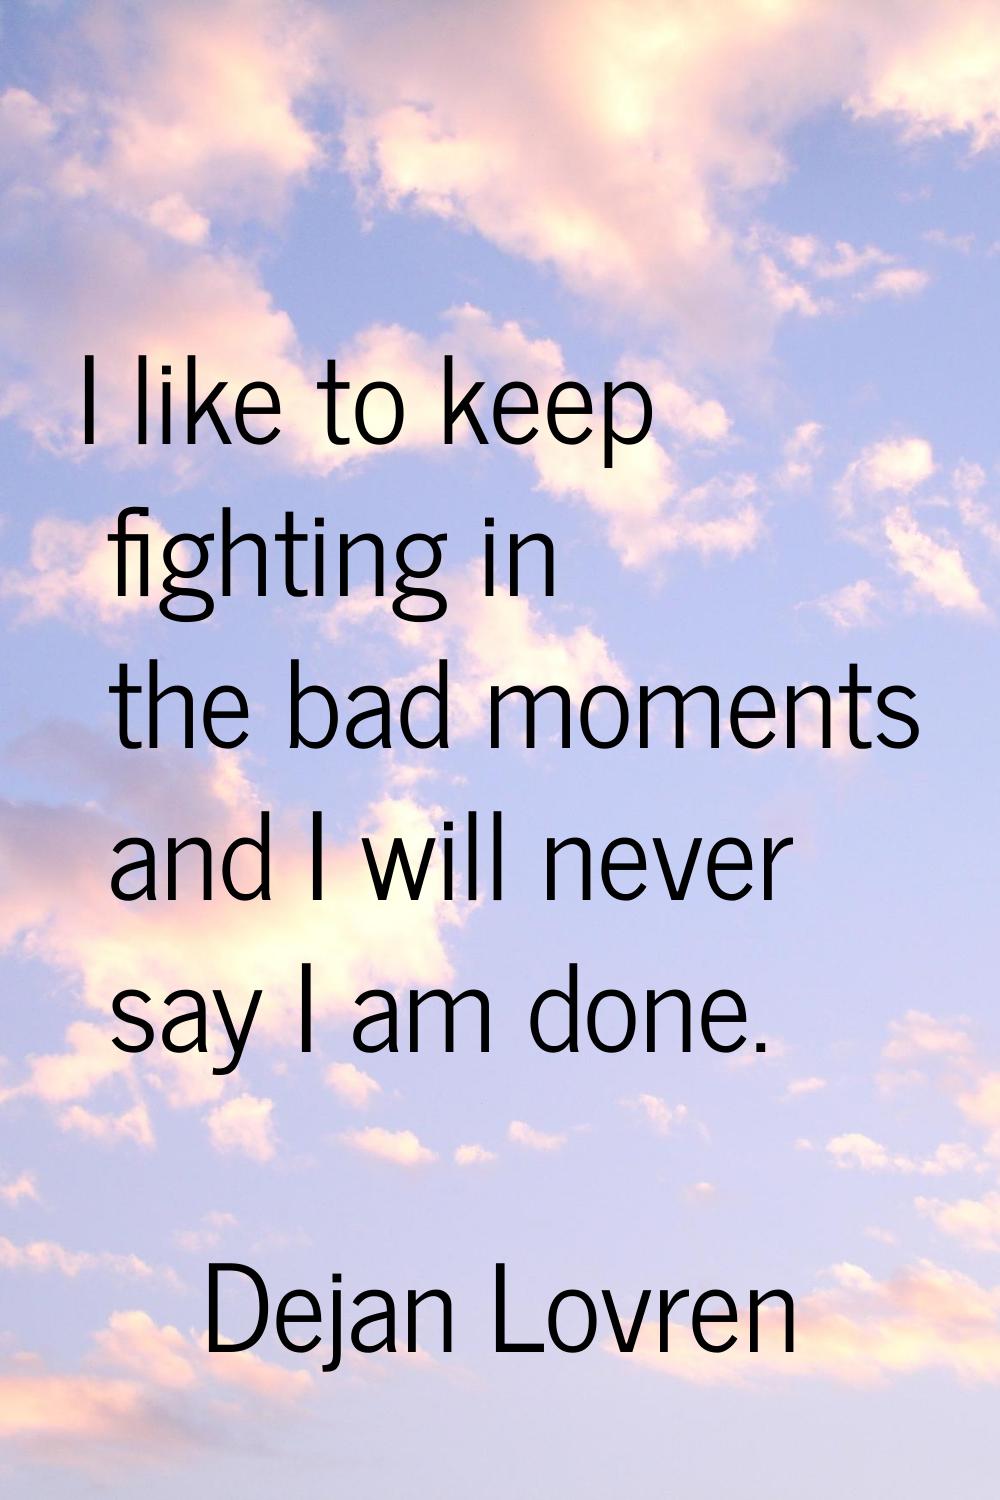 I like to keep fighting in the bad moments and I will never say I am done.